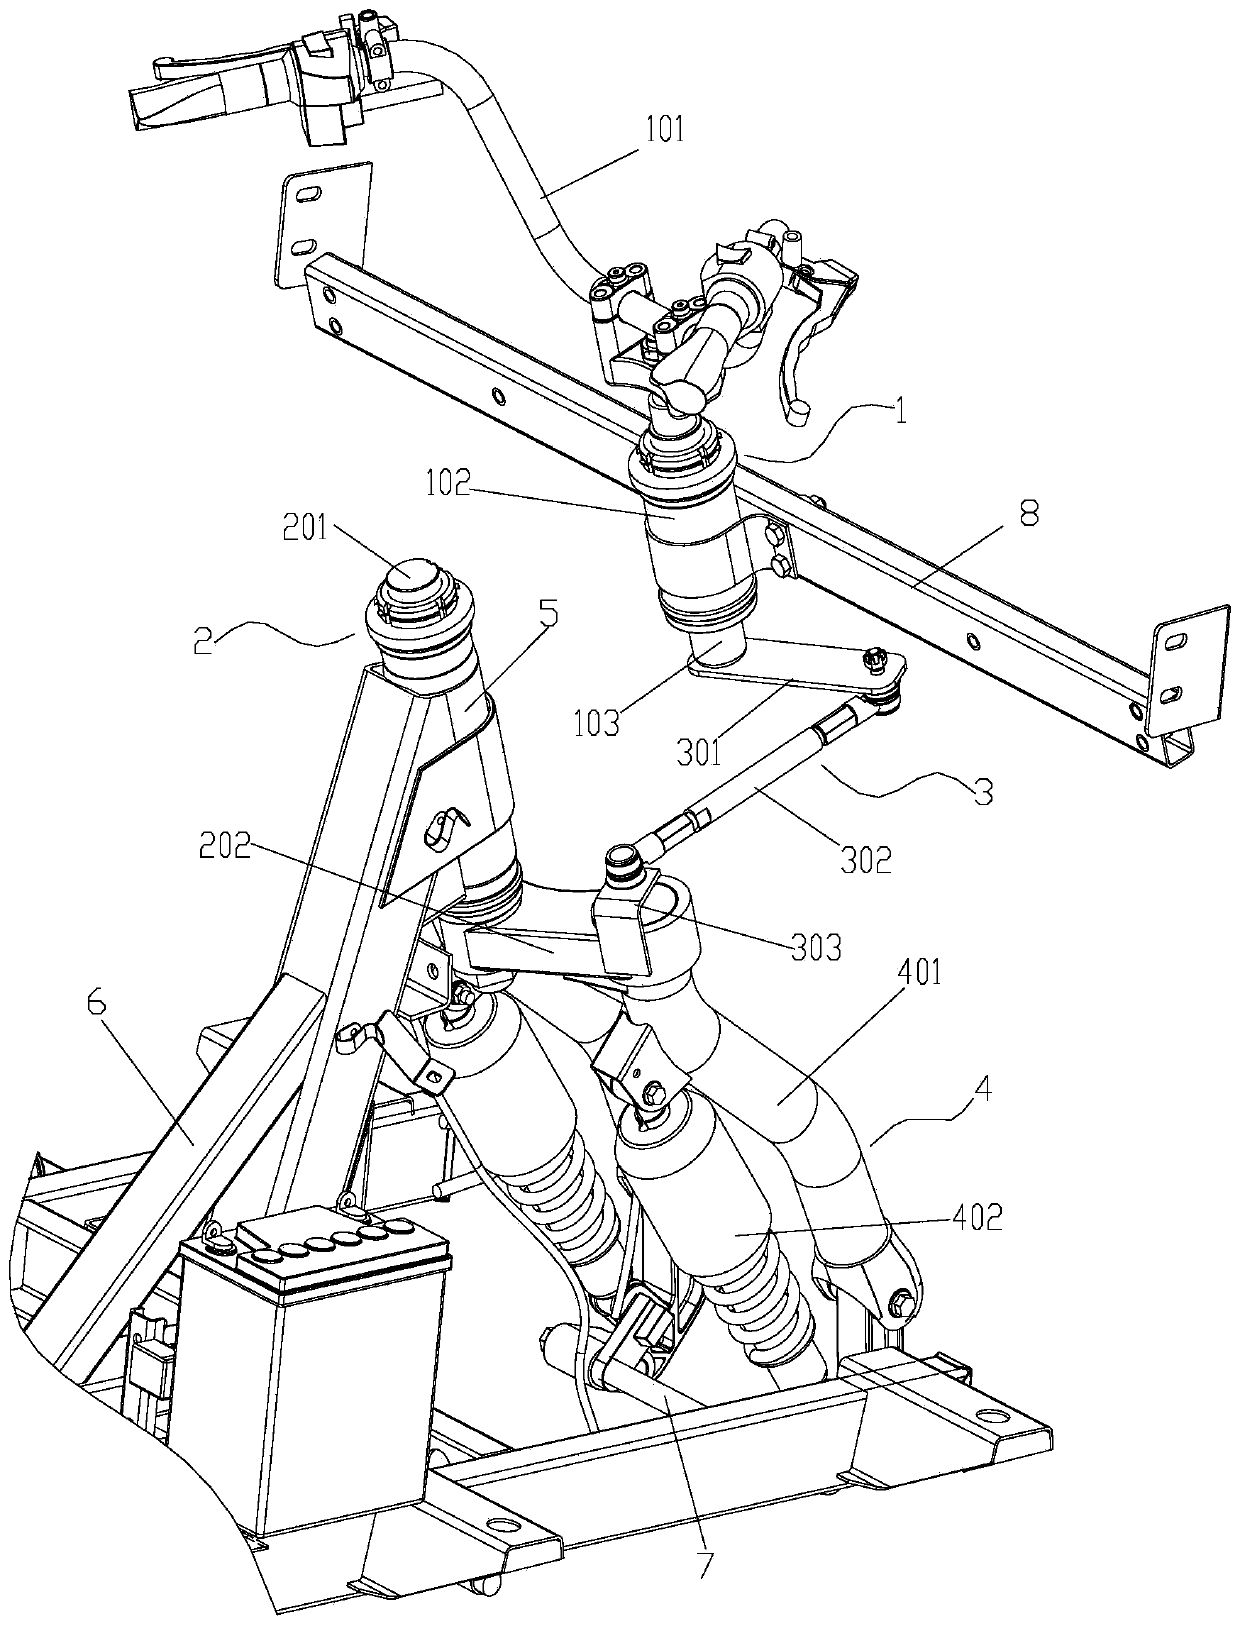 Steering system for eccentric steering and three-wheeled motorcycle